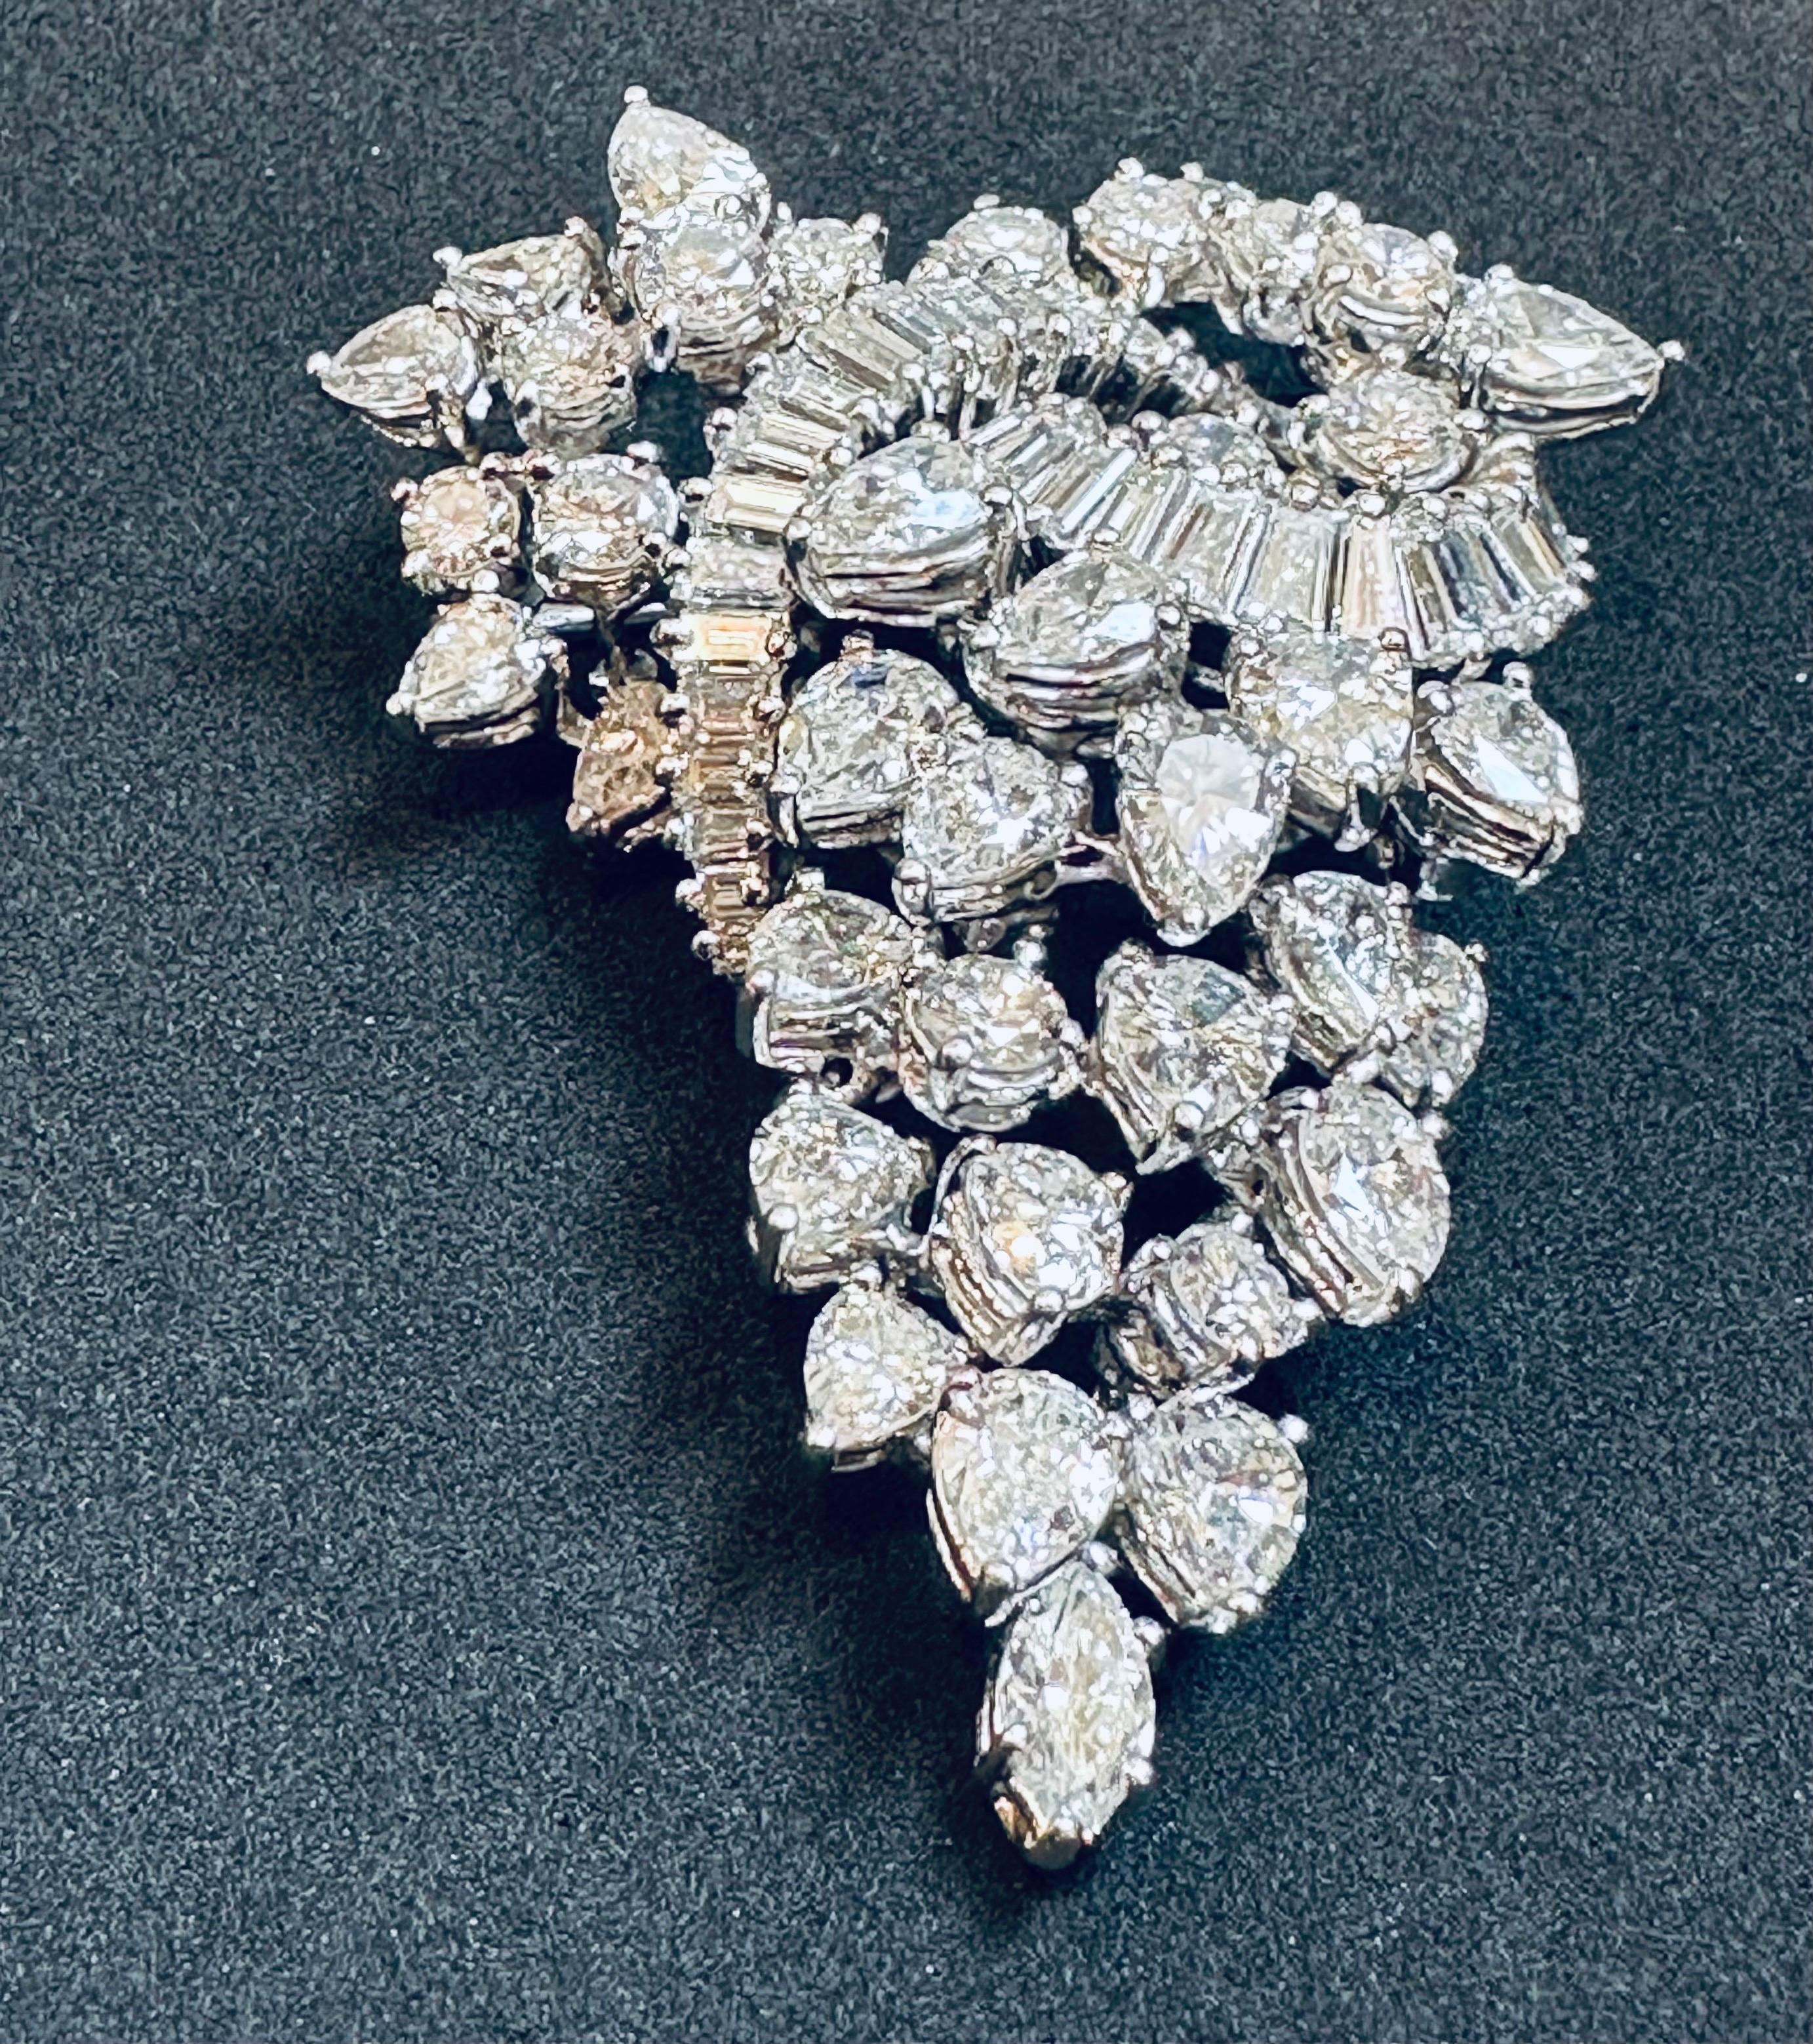 This Antique Diamond & Platinum Pin/Brooch/Pendant is a stunning piece of jewelry that has a total of 15.5 carats of diamonds. All of the diamonds are of the highest quality, with a VS rating. The diamonds are all large size, with 42 pear and